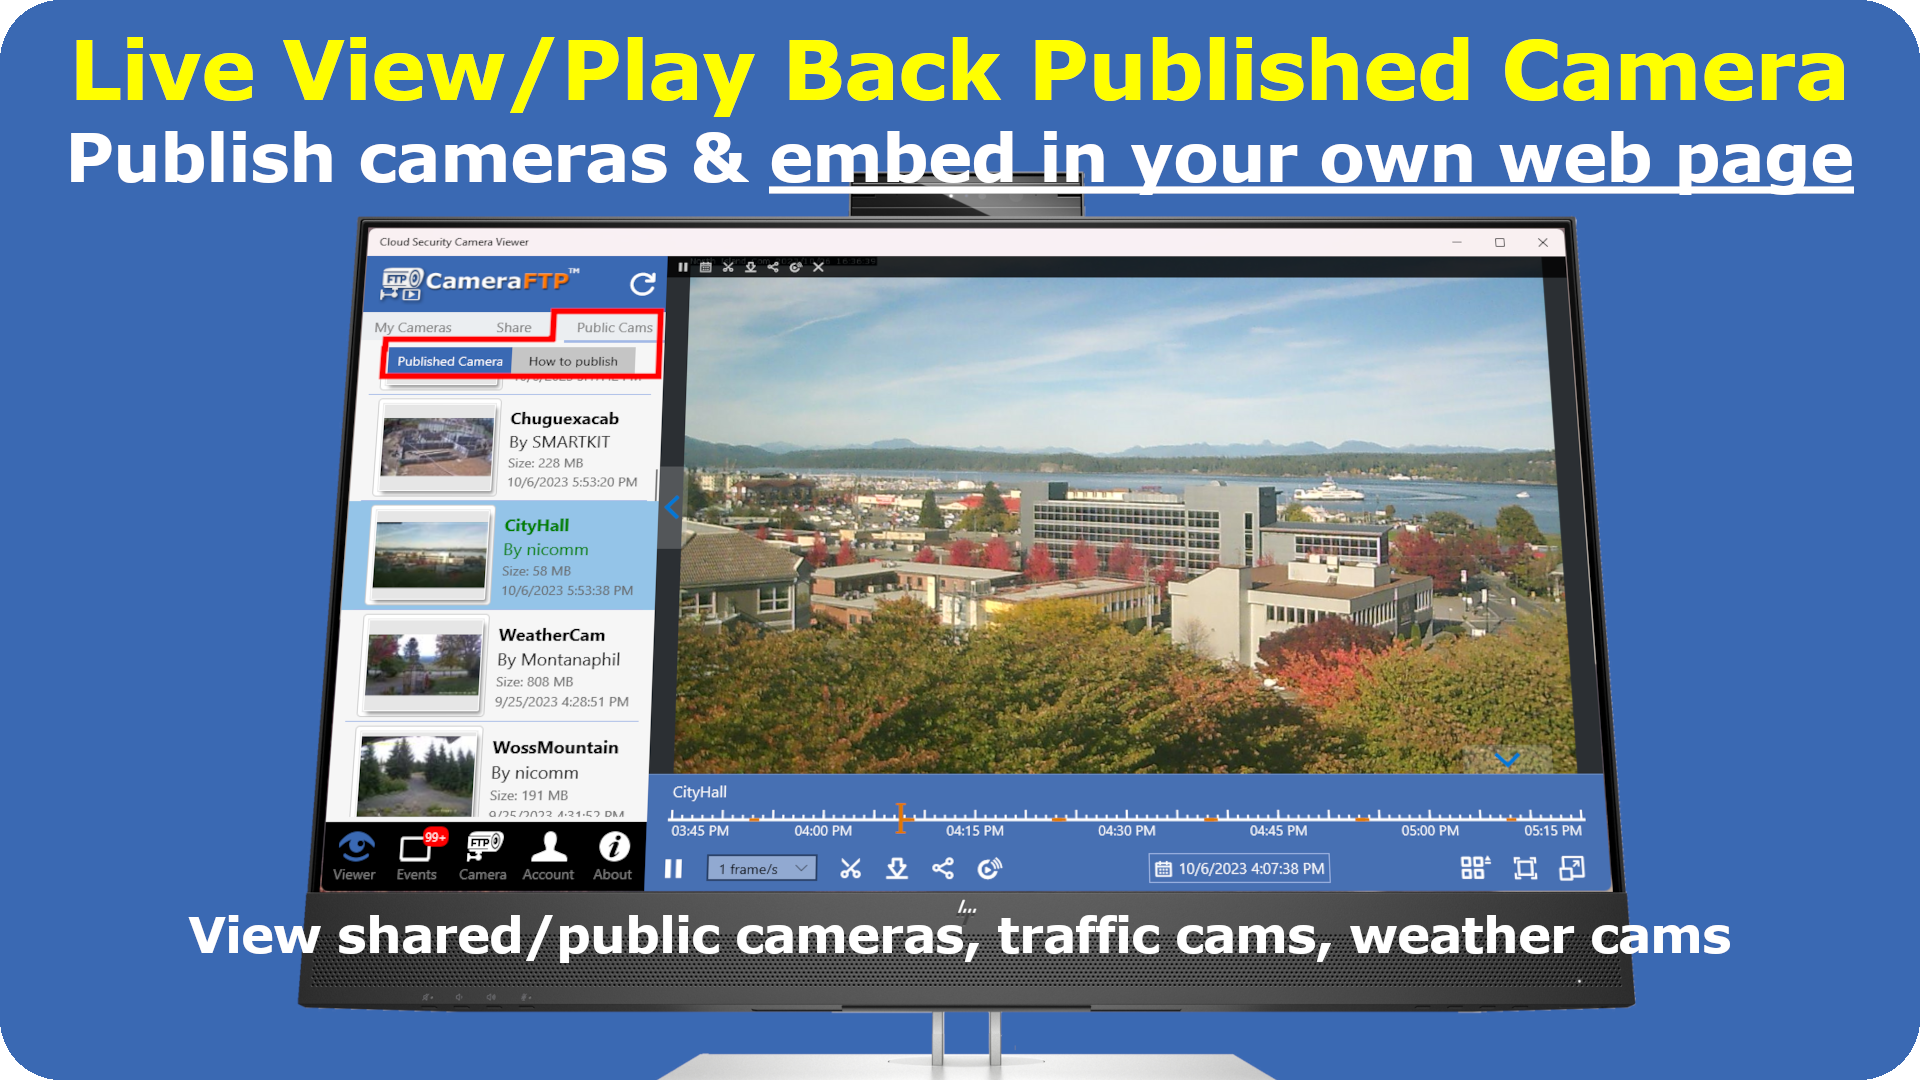 Free live view or play back published/shared cameras, such as traffic cams, weather cams, etc. You can share or publish your cameras. Published cameras can be embedded in your own web page.